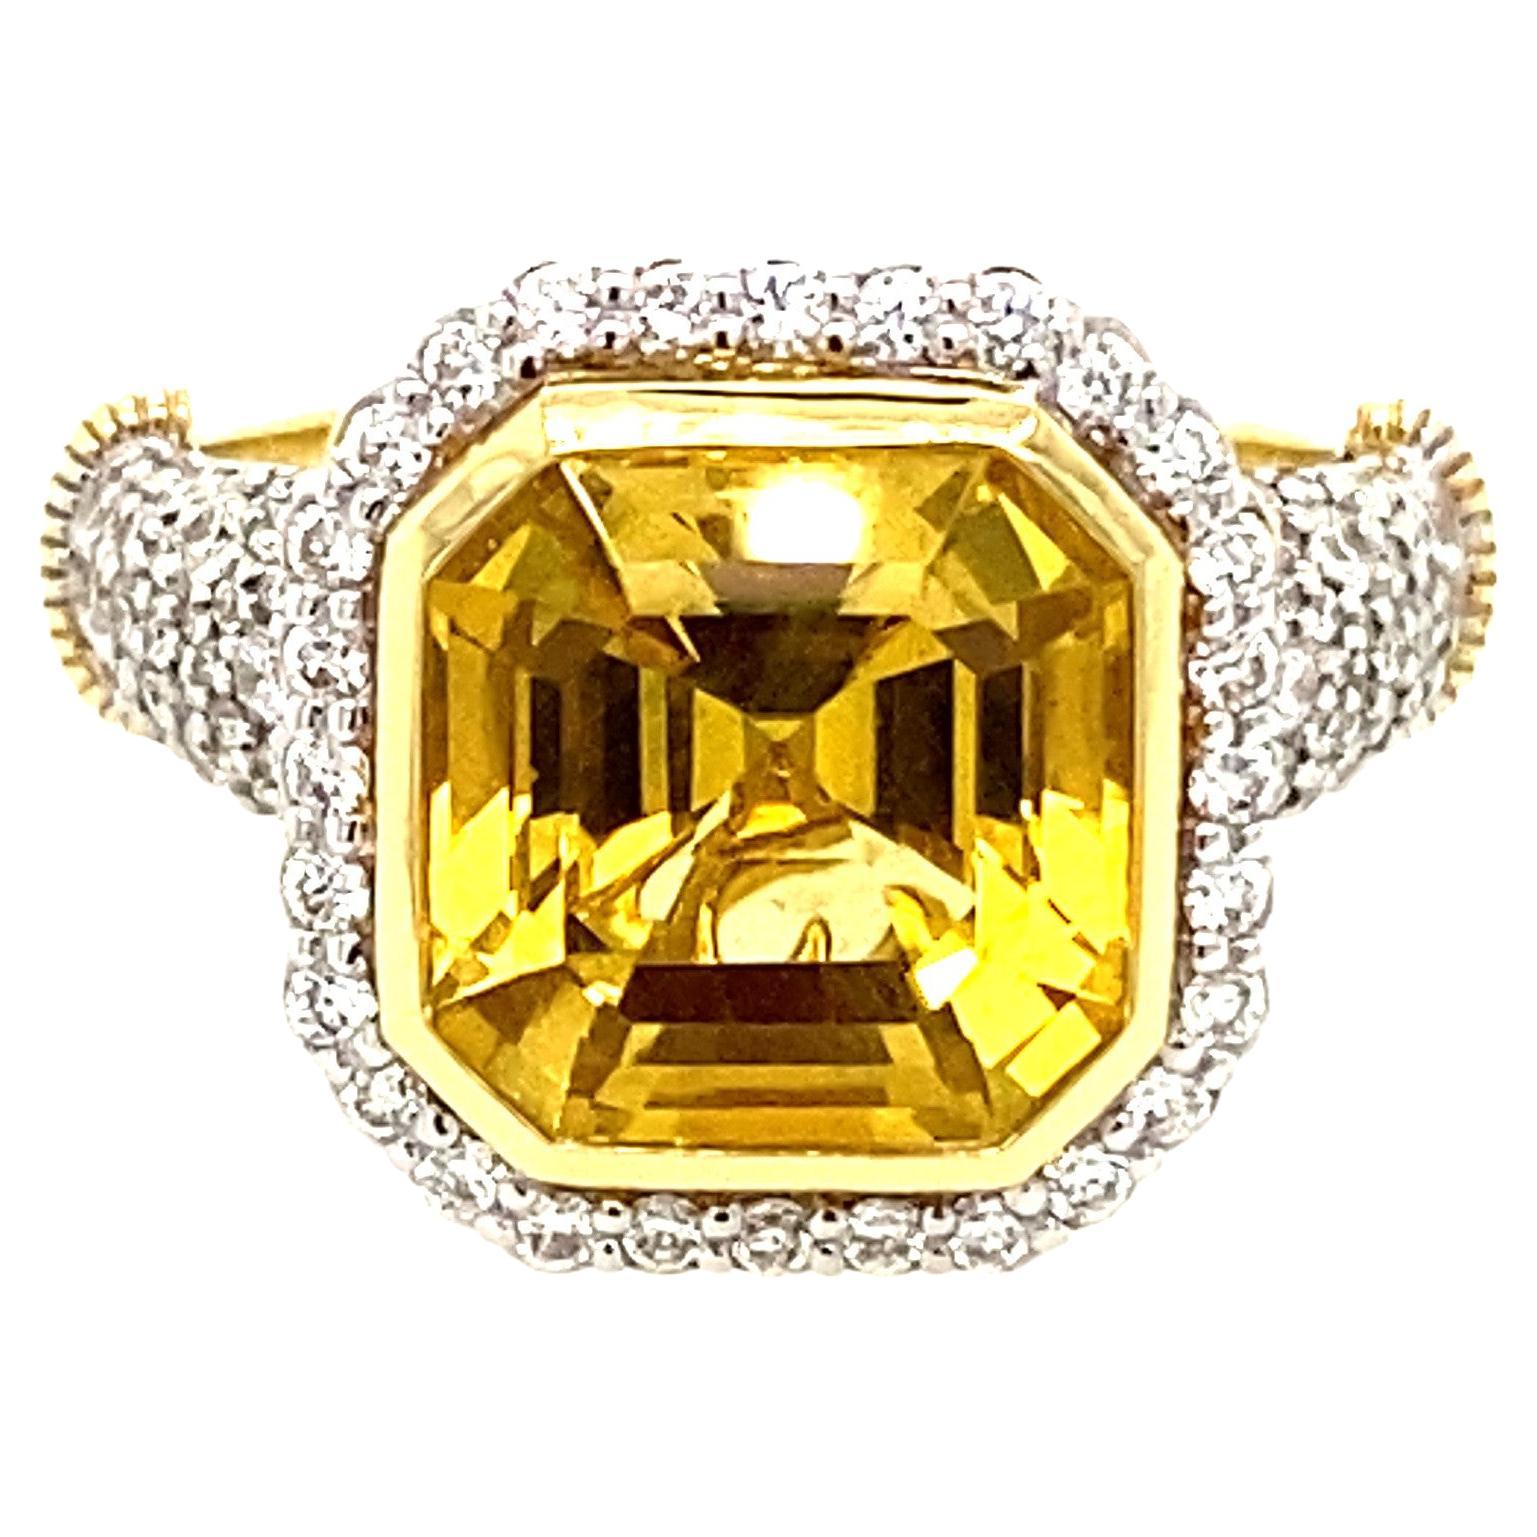 Sloane Street One-of-a-Kind Yellow Beryl Cocktail Ring For Sale